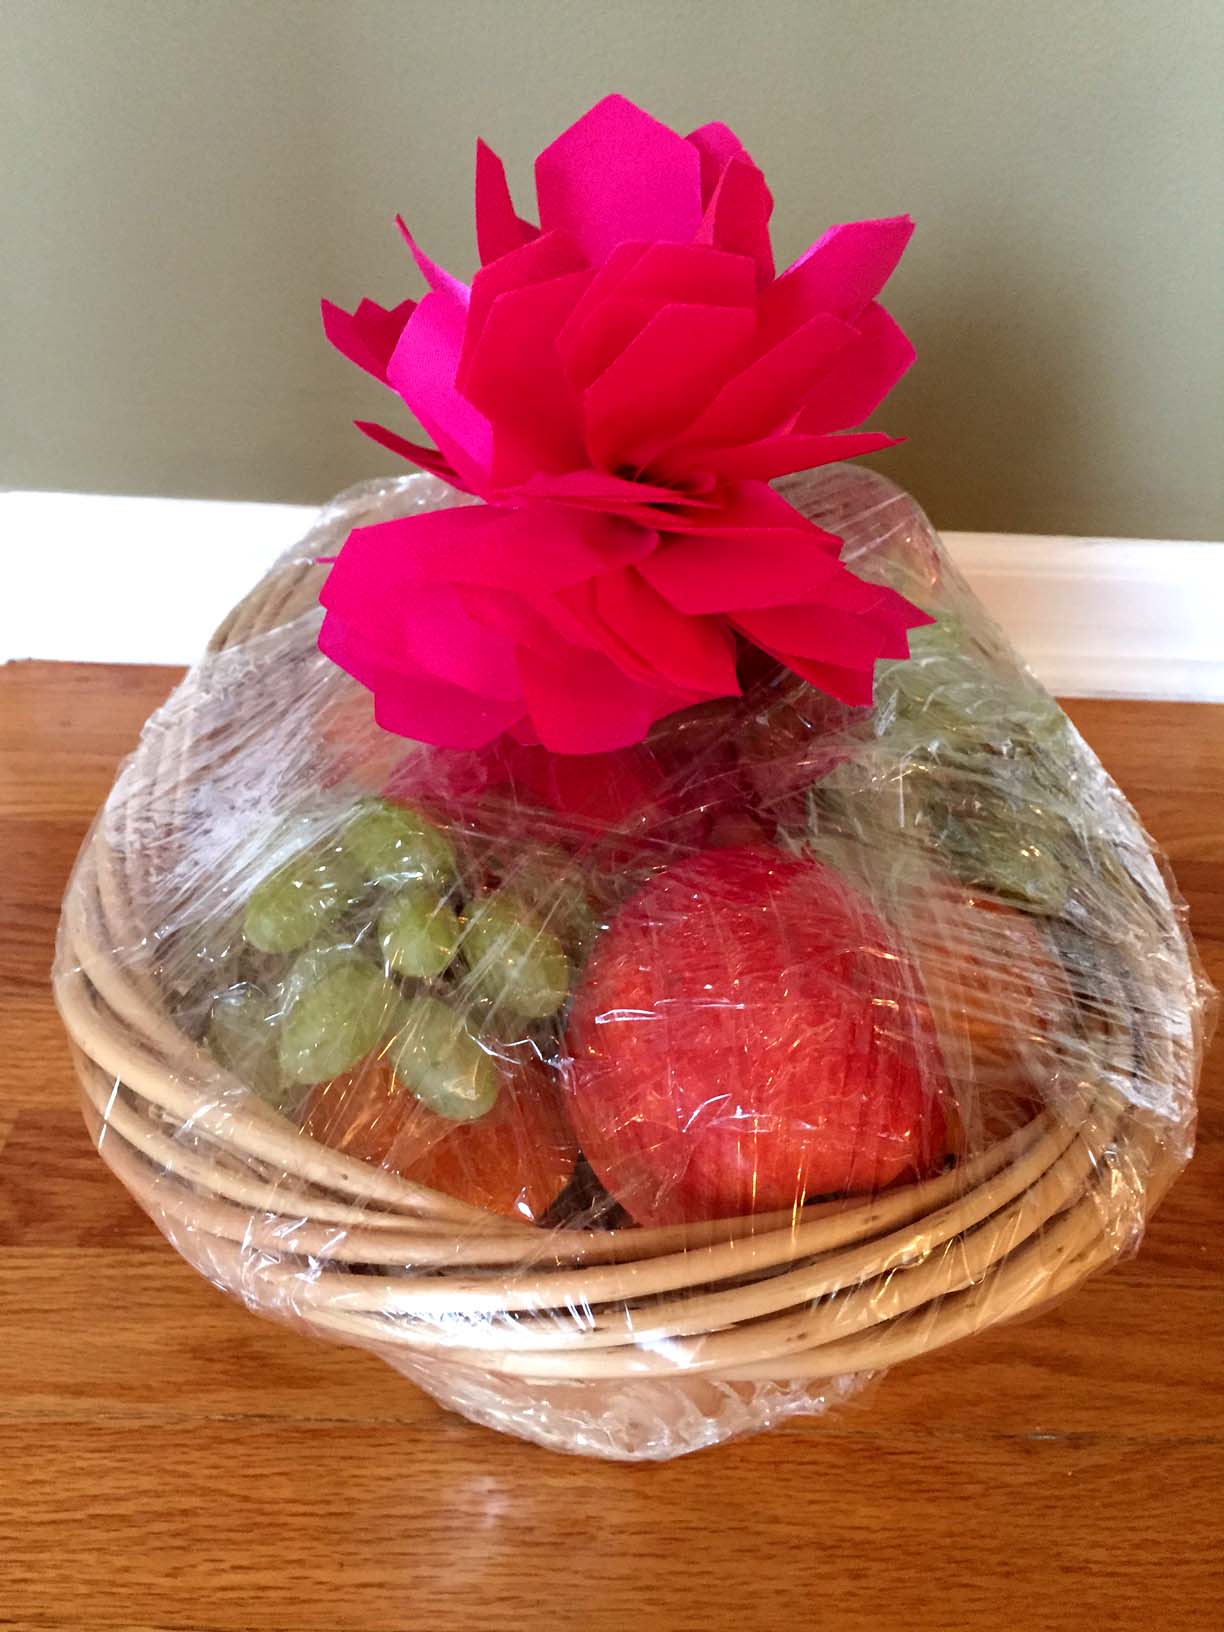 Gift Baskets for Women - Happiness is Homemade